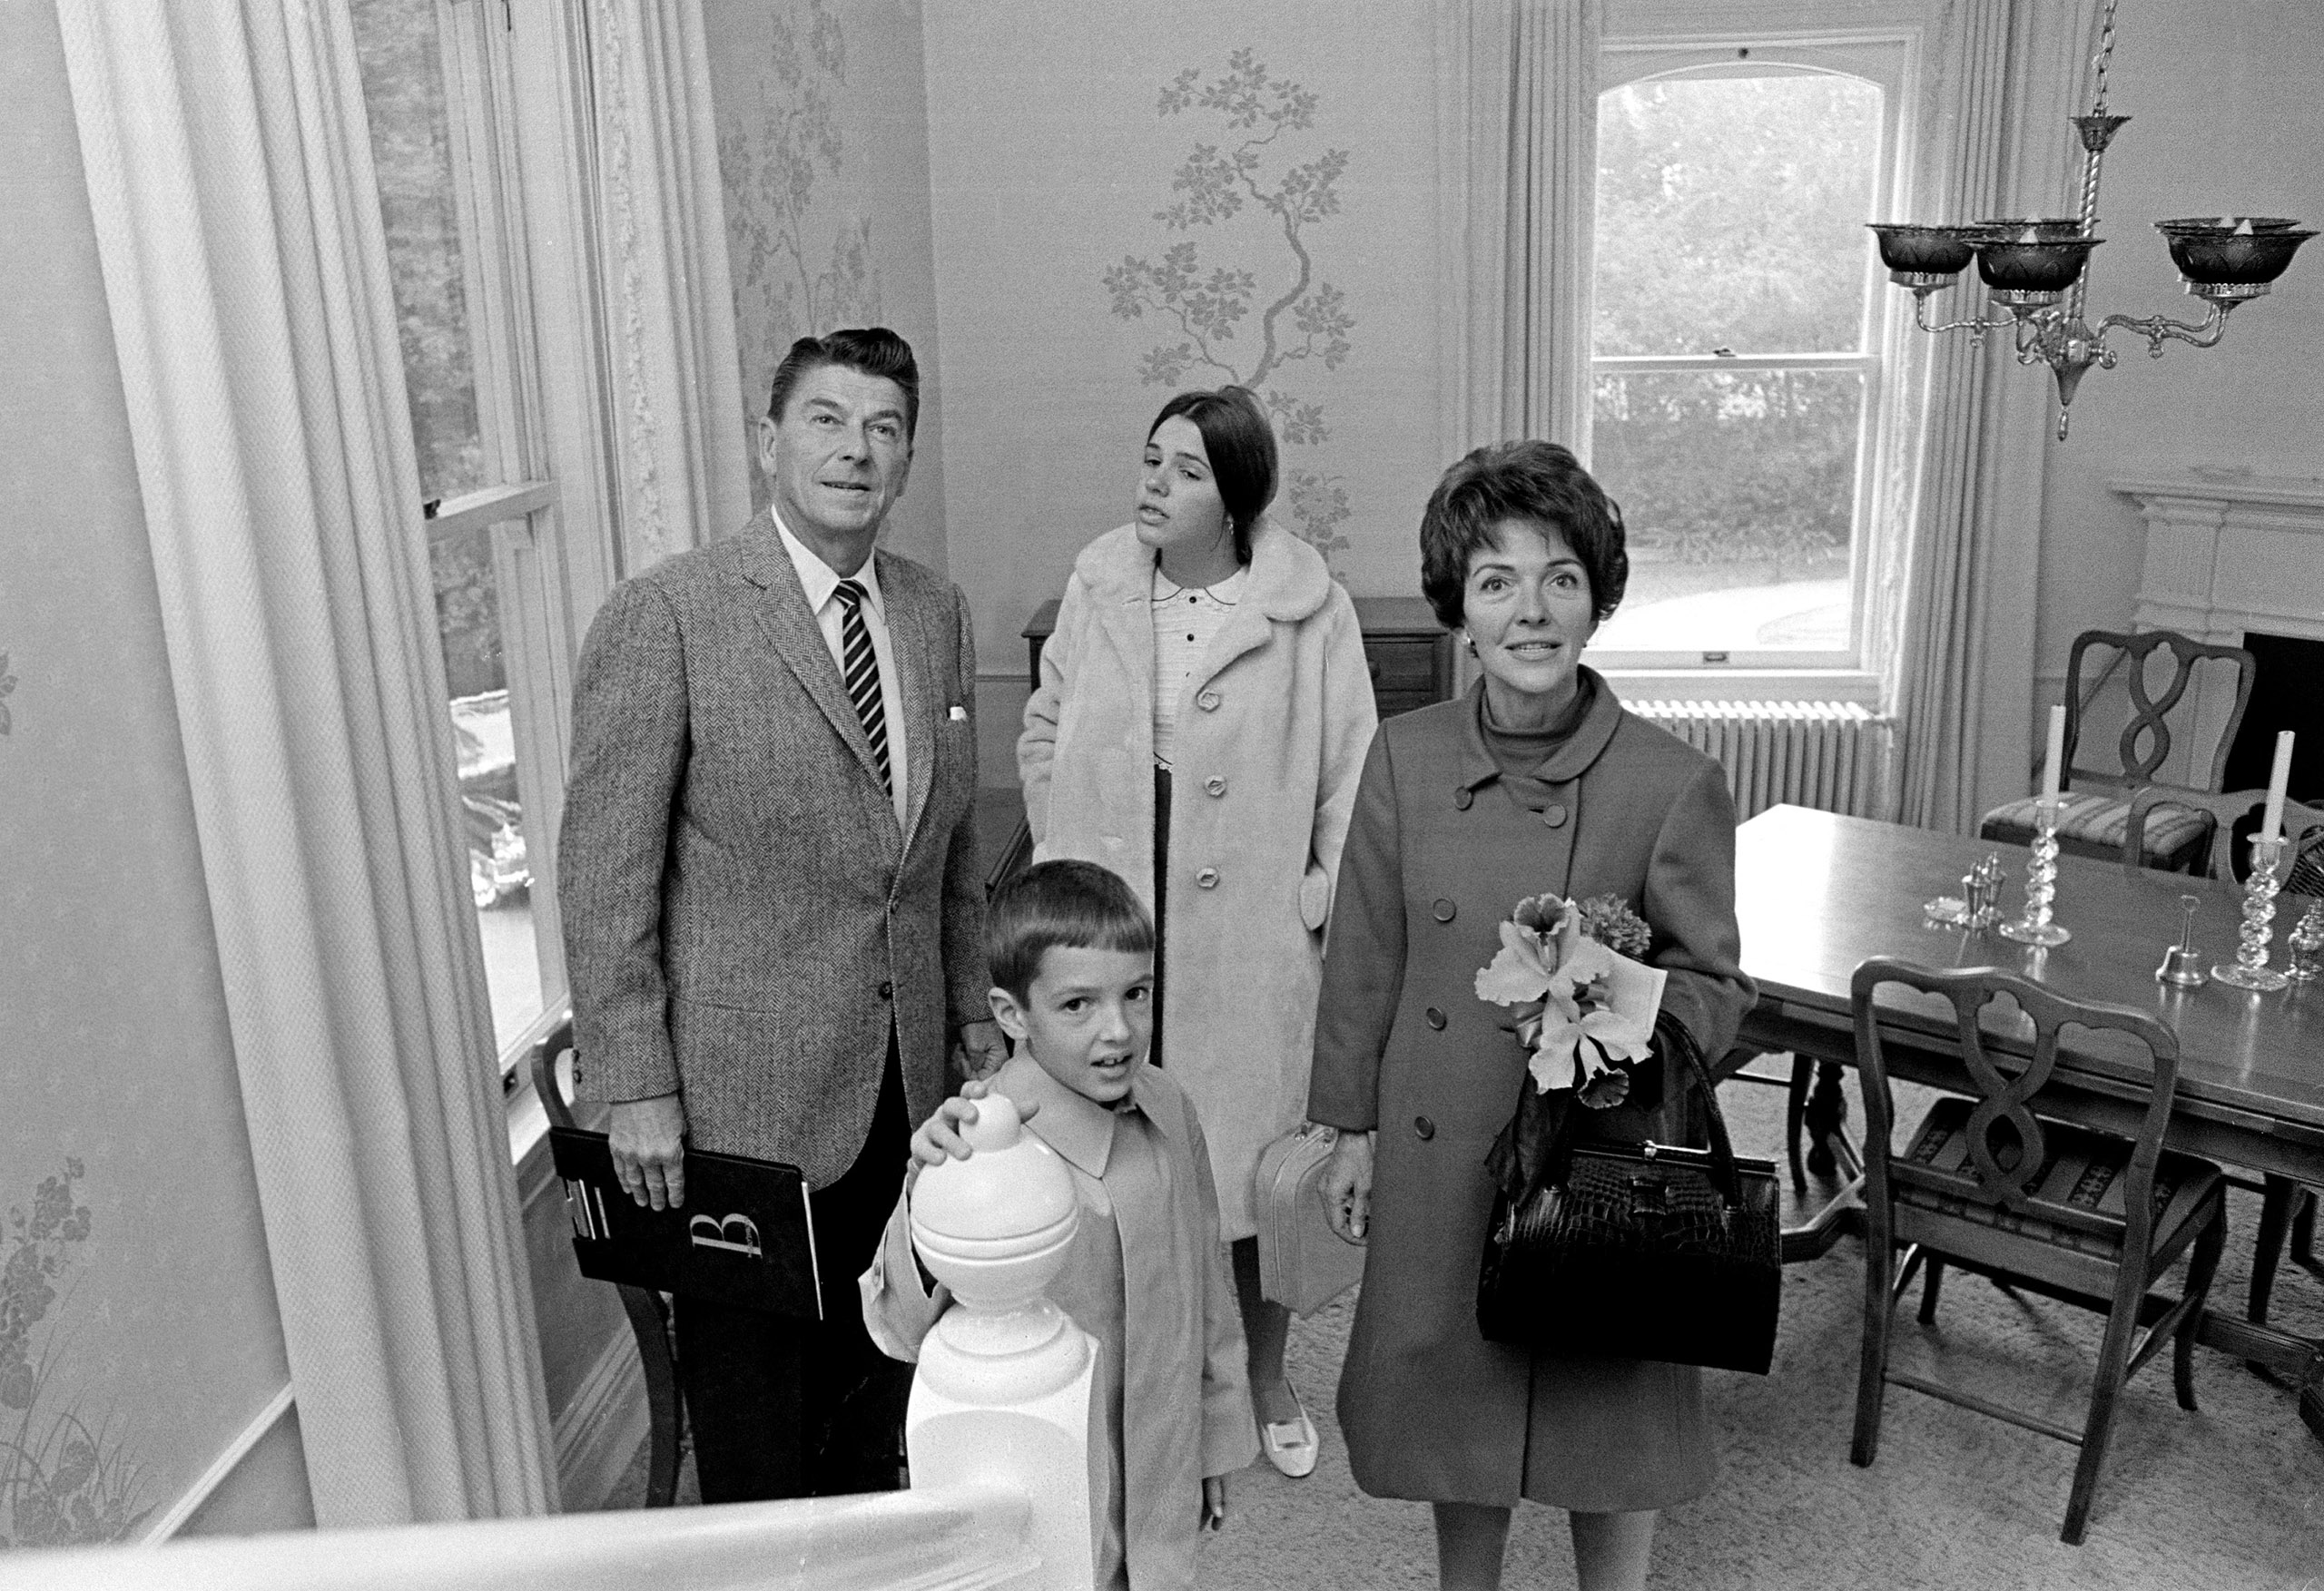 Ronald Reagan: A 1967 photograph captures Ronald, Nancy and their two children, Patricia, 13, and Ronald Jr., 8, as they take stock of their new home, the California governor's mansion. Ronald Jr. pursued careers as a ballet dancer and journalist; Patti was an outspoken opponent of many of her father's policies. During his first marriage to Jane Wyman, Reagan fathered two children, Maureen, an actress and public servant, and Christine, who died in infancy. They also adopted Michael, who became a popular syndicated talk-show host.